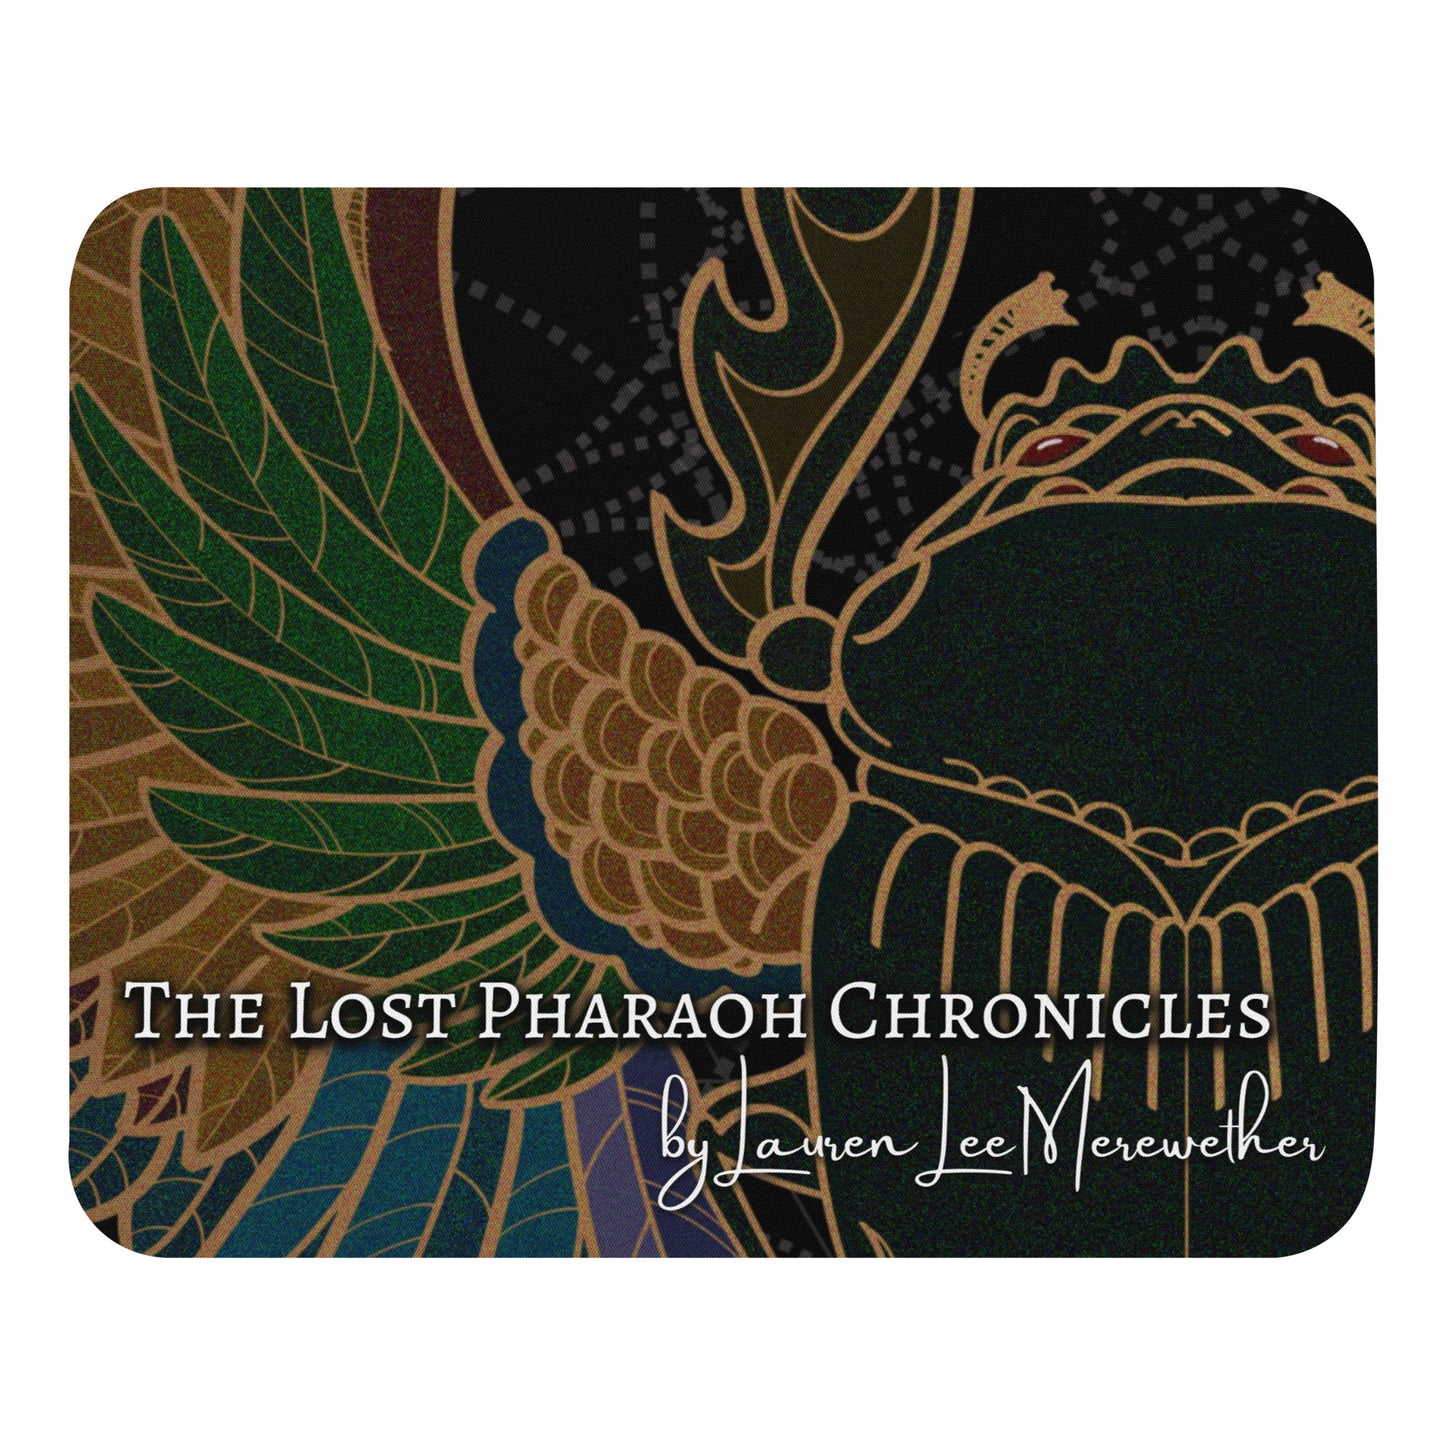 A Lost Pharaoh Chronicles Scarab Mouse pad